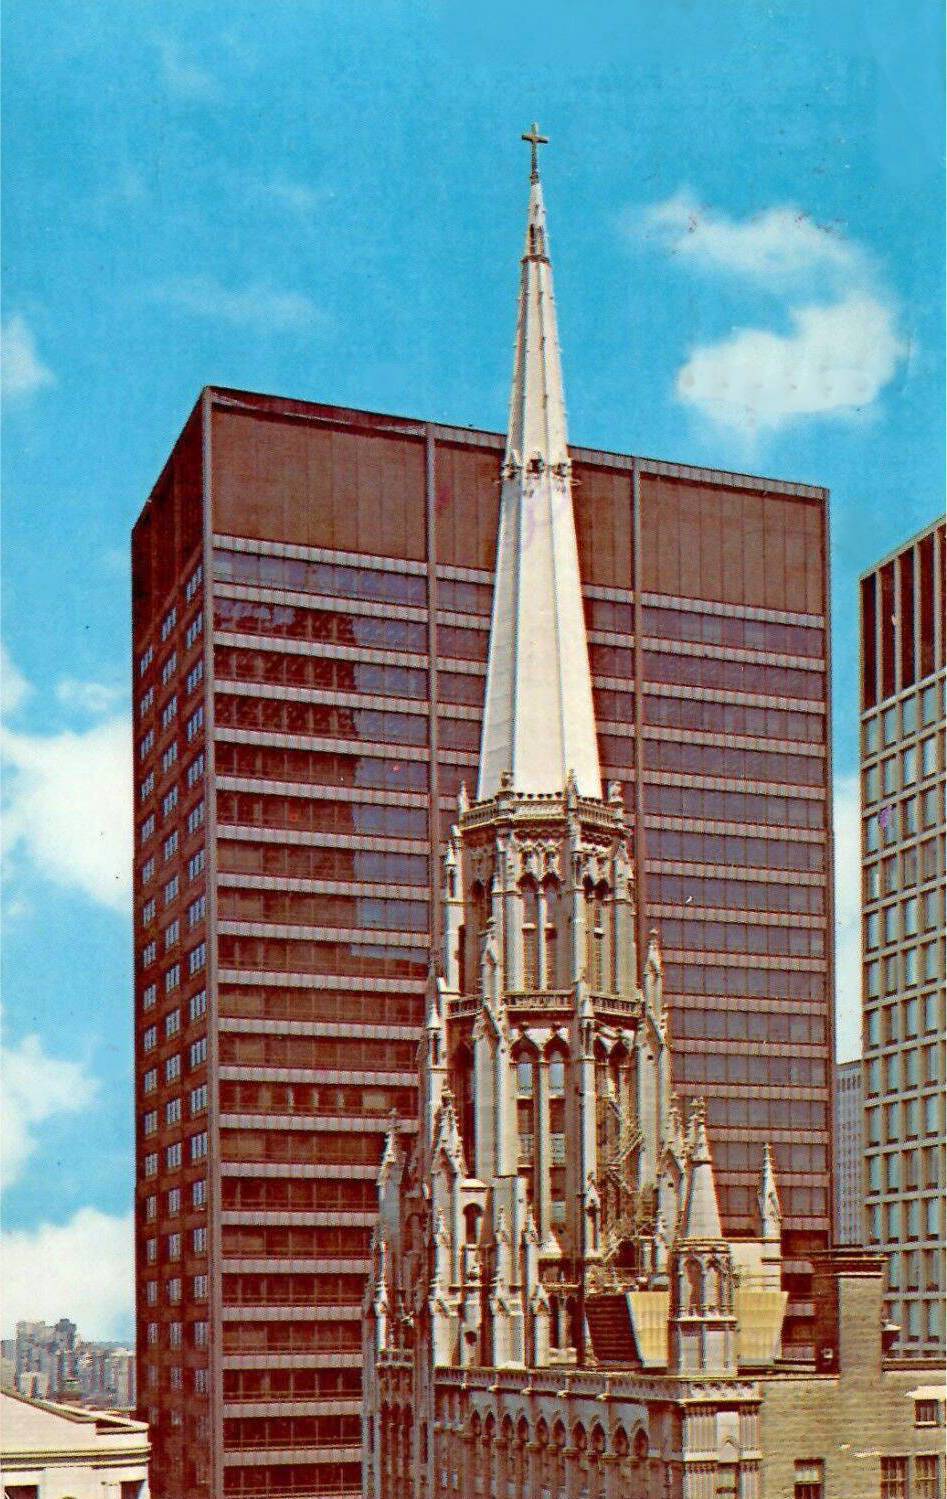 POSTCARD - CHICAGO - THE CHICAGO TEMPLE - SKYSCRAPER CHURCH - FIRST METHODIST - CLARK AND WASHINGTON - CIVIC CENTER BEHIND BUILT OF CORTEN (WEATHERING) STEEL - 1970